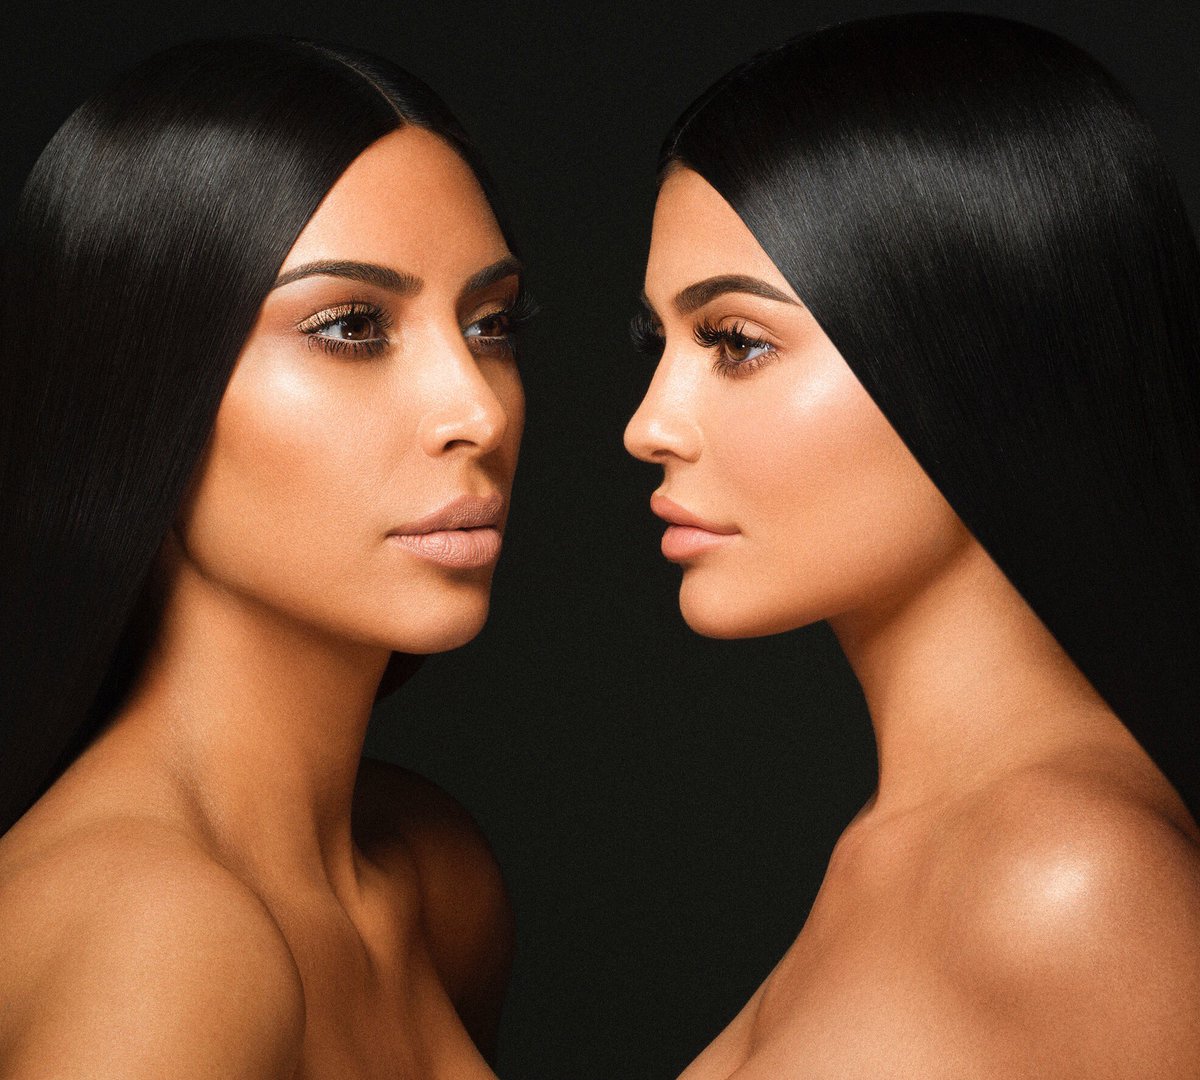 KKW X KYLIE https://t.co/4AEX9wUxal